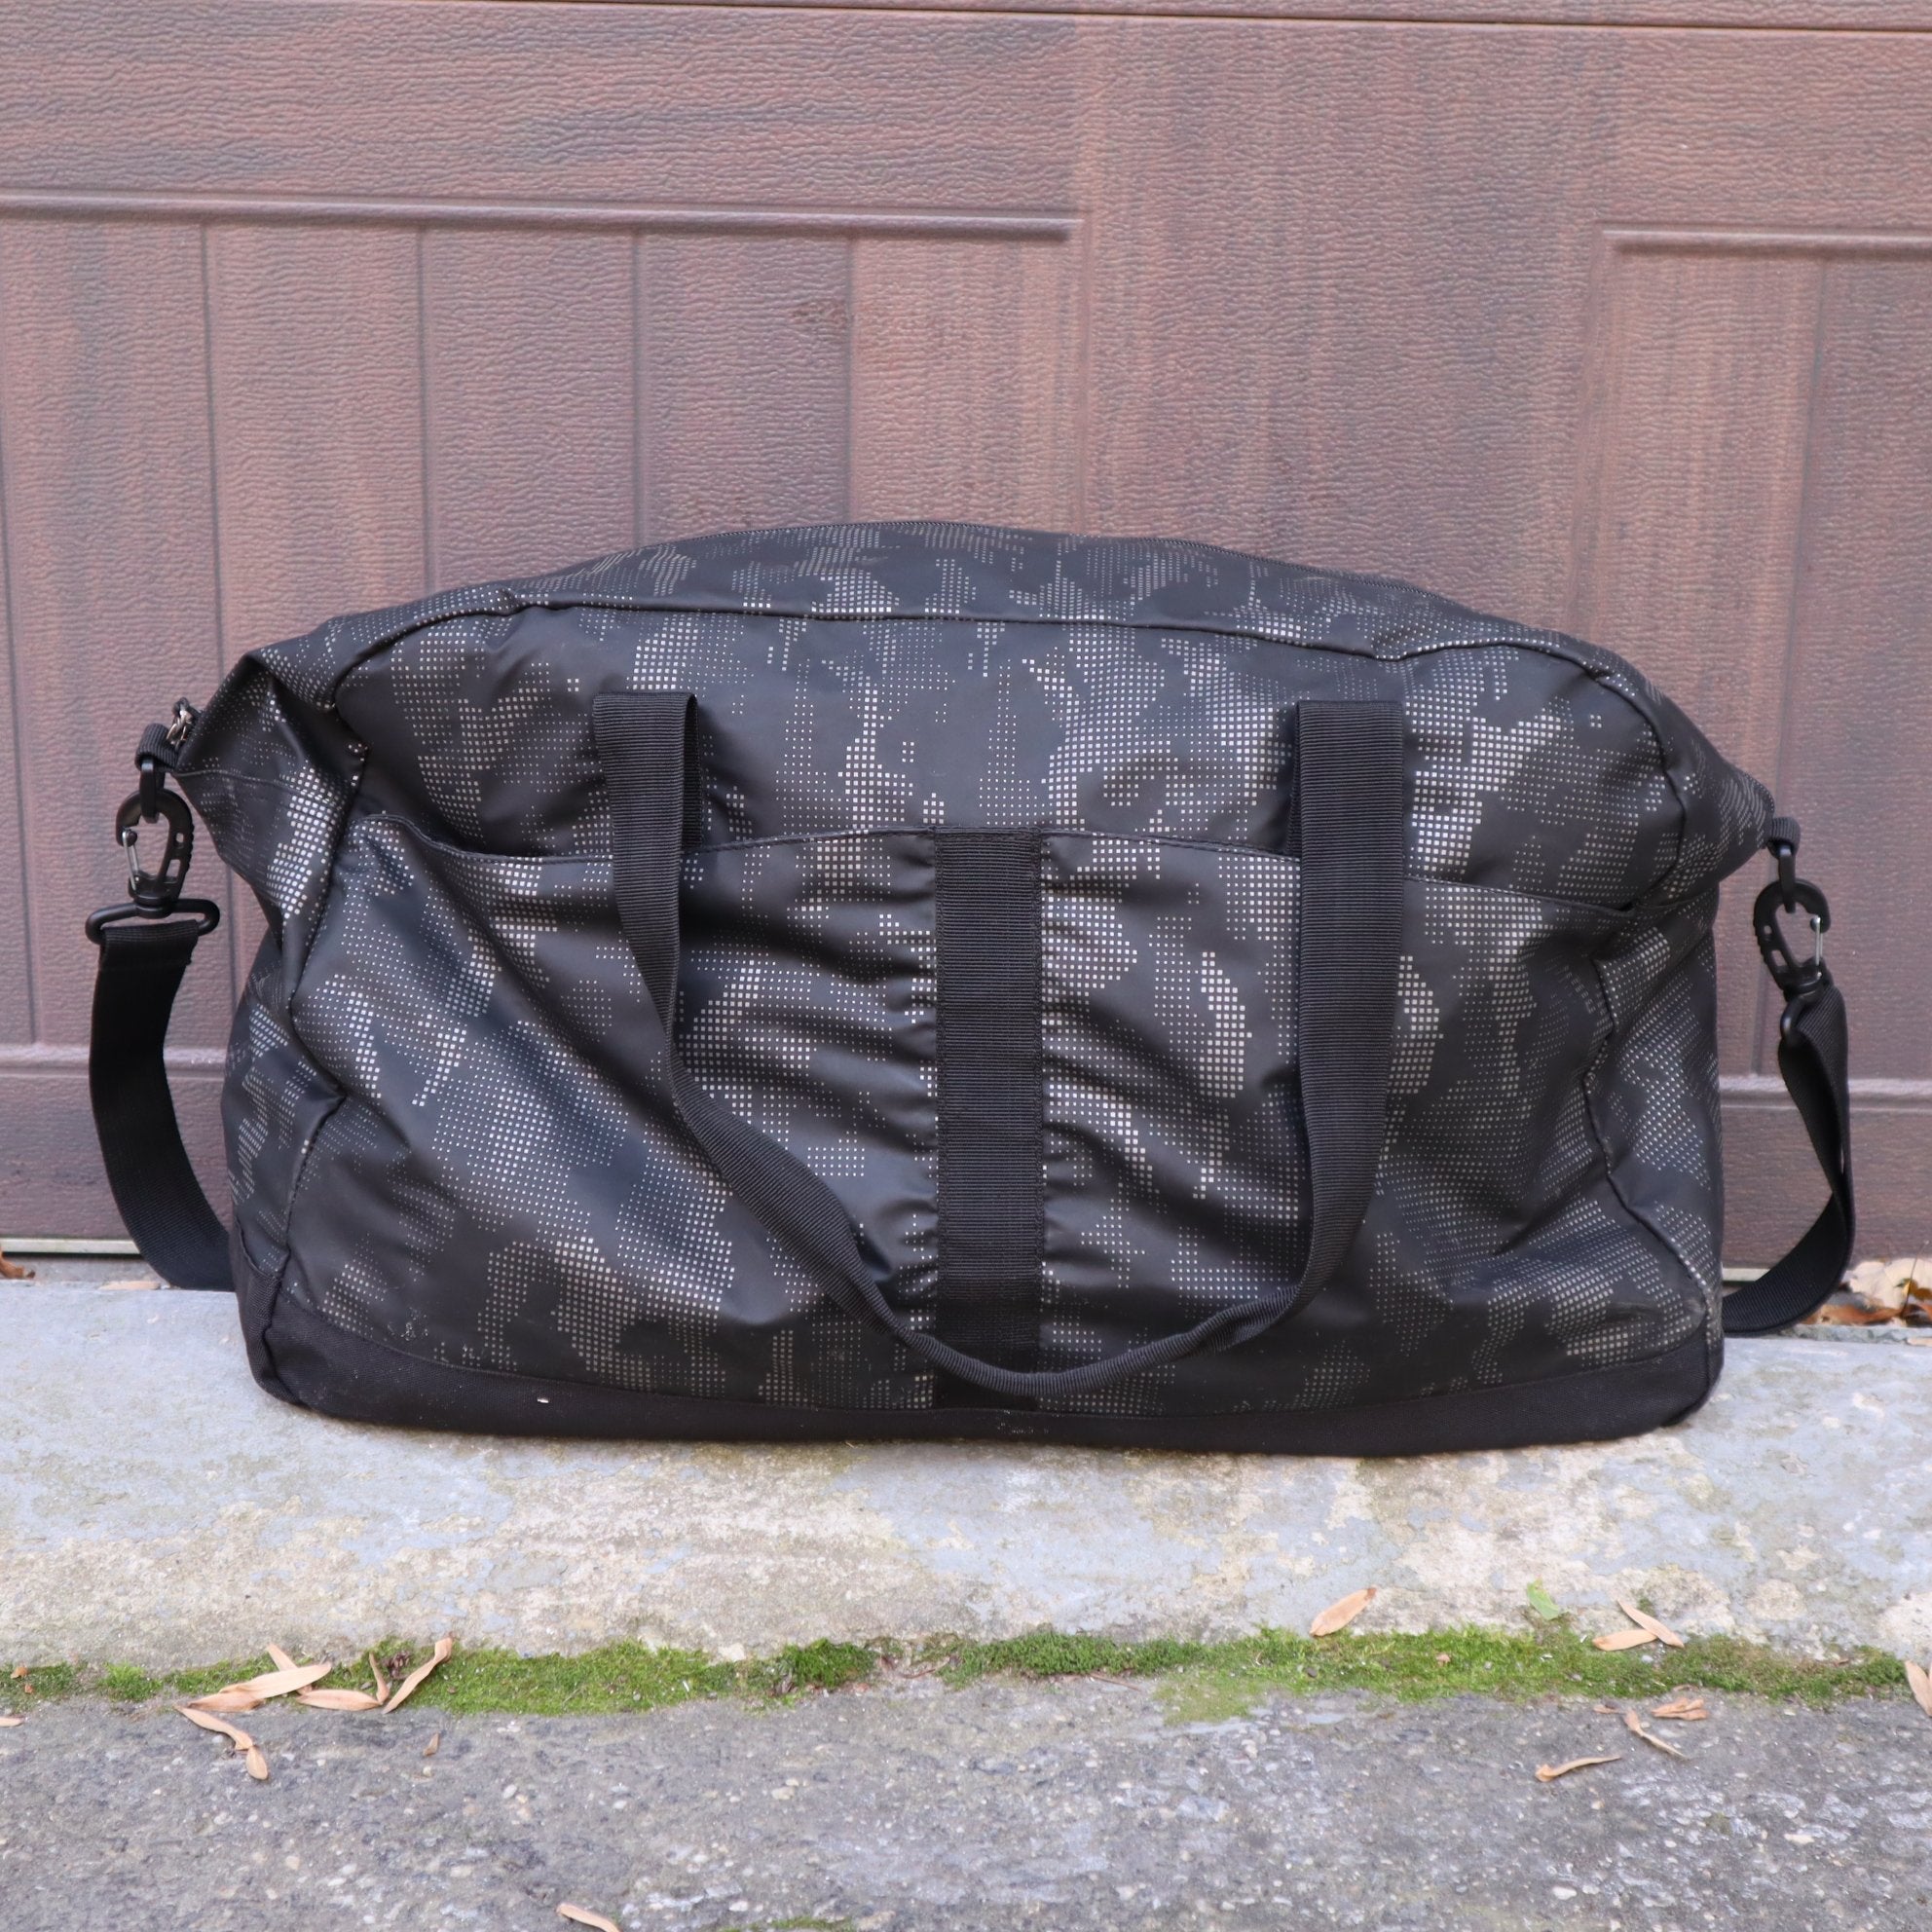 Durable Duffle is One of the Best Groomsmen Gifts  Man Bags